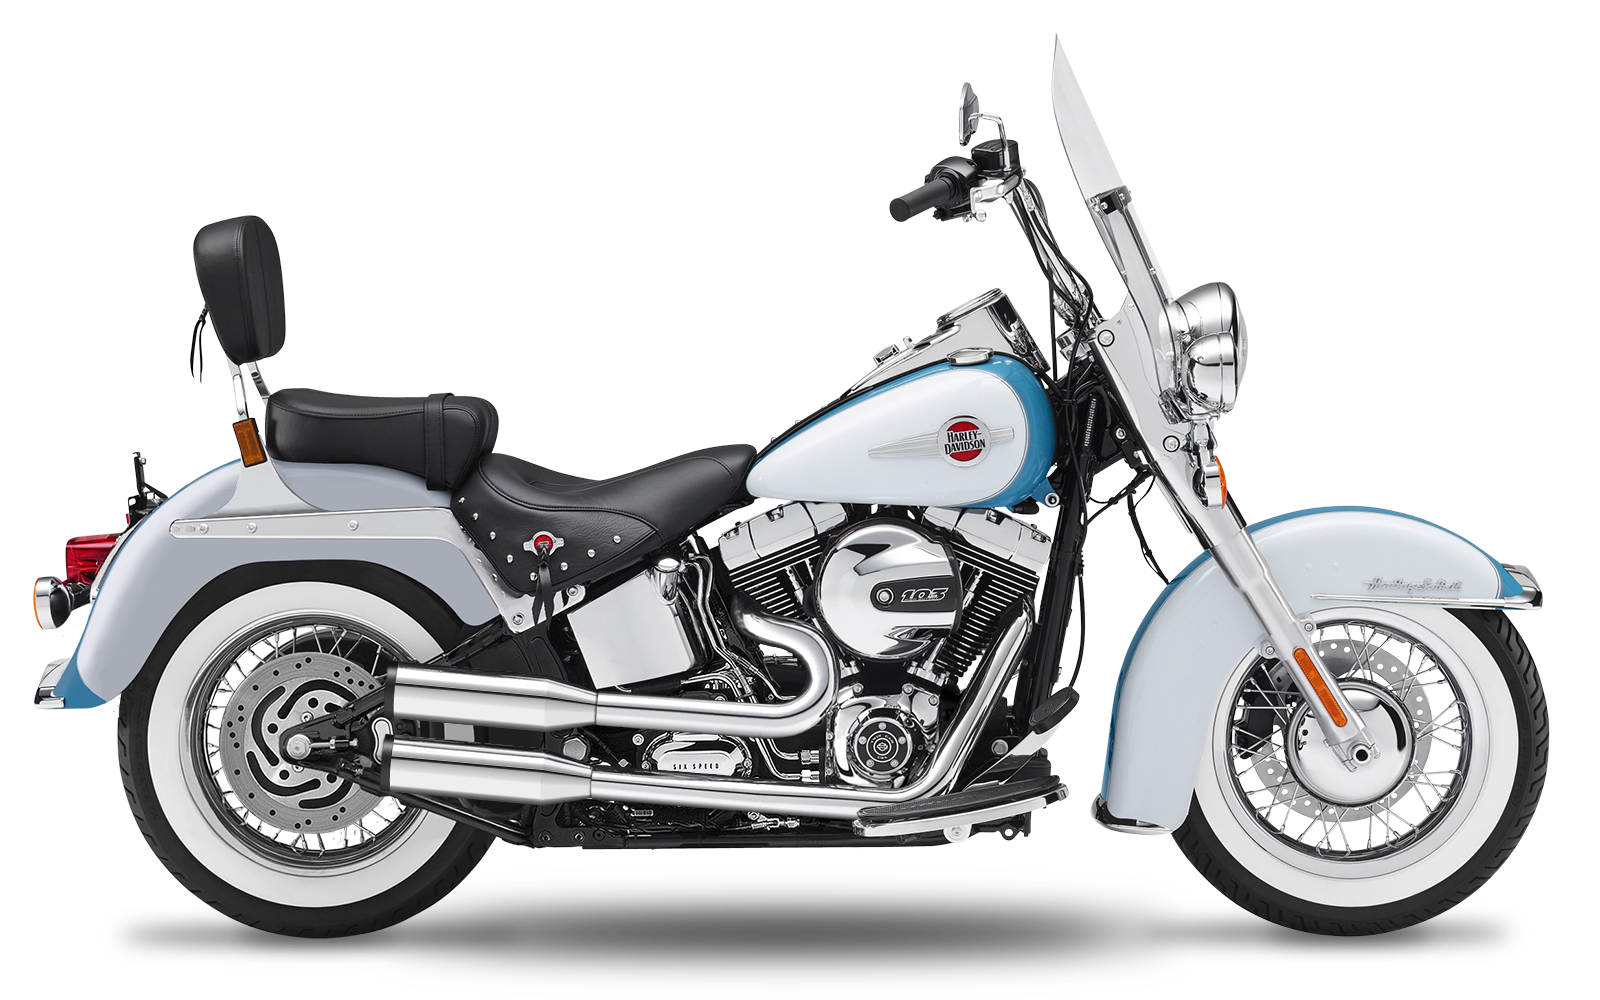 CRUISER/SOFTAIL - Heritage Classic - TC88 - 2000-2006 - Complete systems adjustable